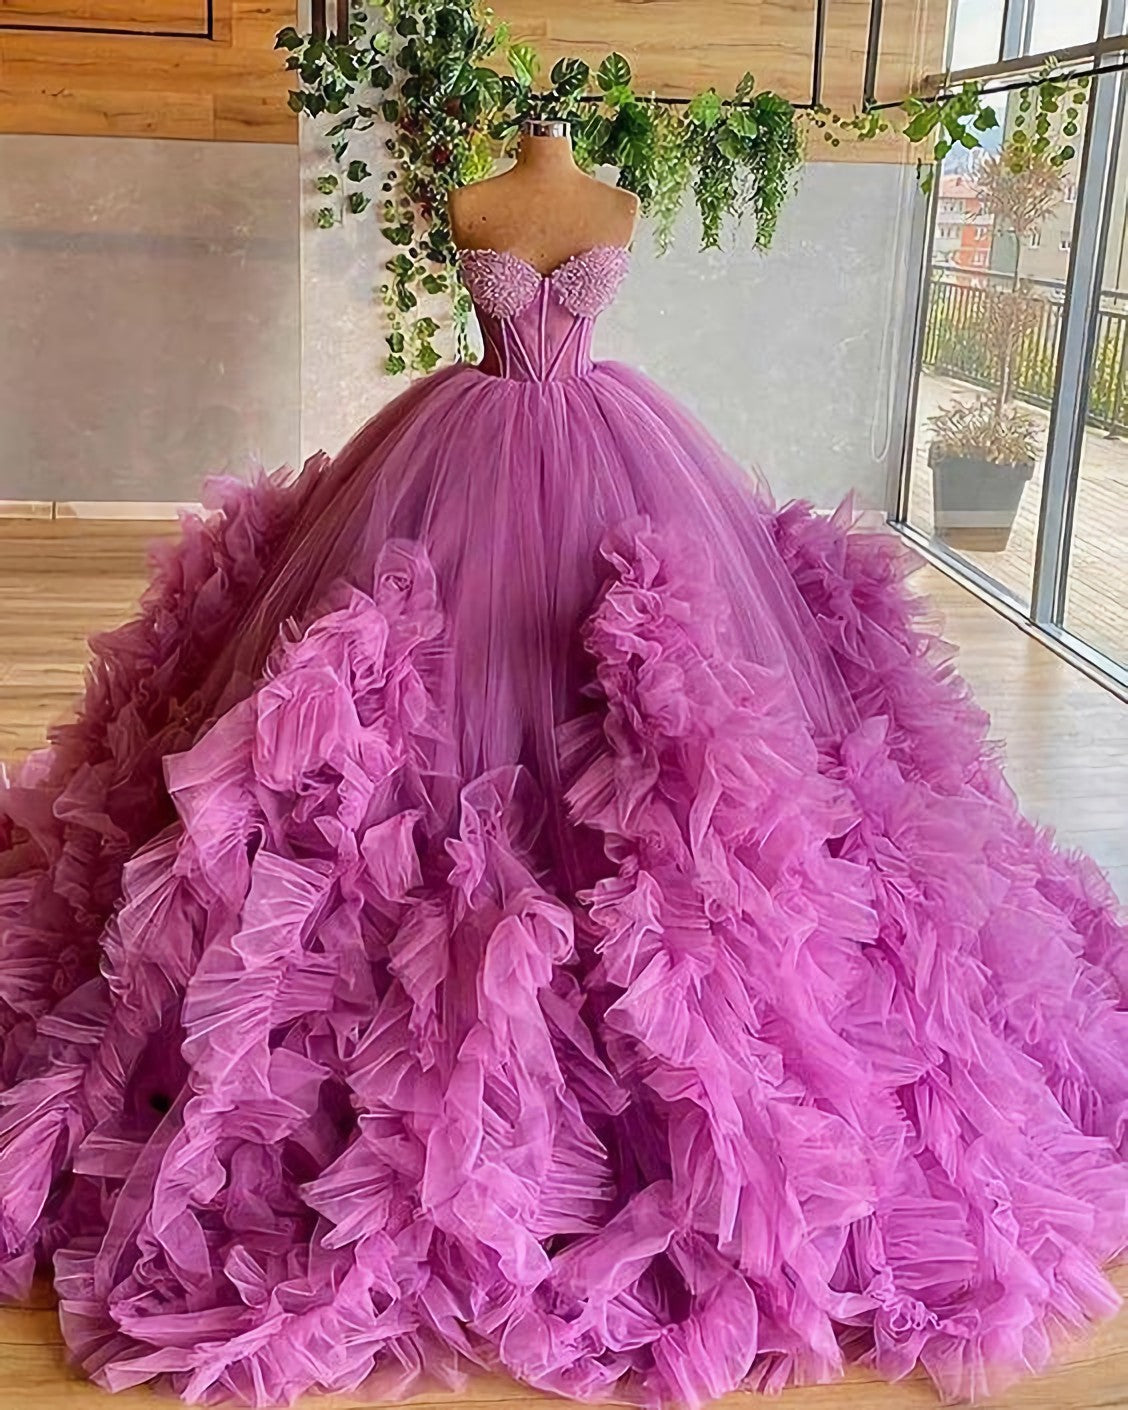 Sweetheart Purple Beading Bodice Tulle Ruffle Pleated Corset Ball Gown Evening Dress, Corset Prom Gown outfits, Homecoming Dresses Floral